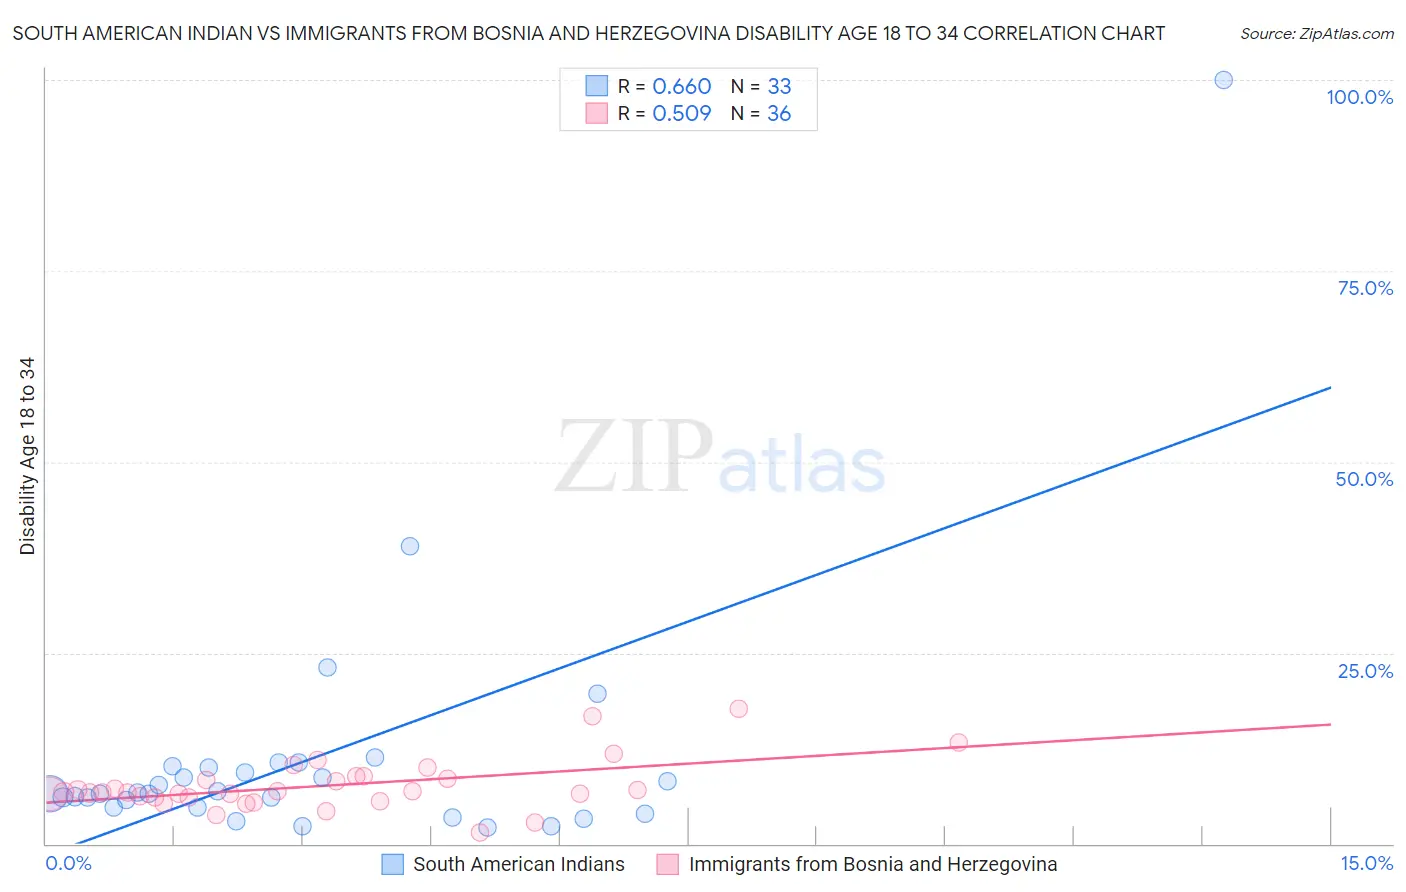 South American Indian vs Immigrants from Bosnia and Herzegovina Disability Age 18 to 34